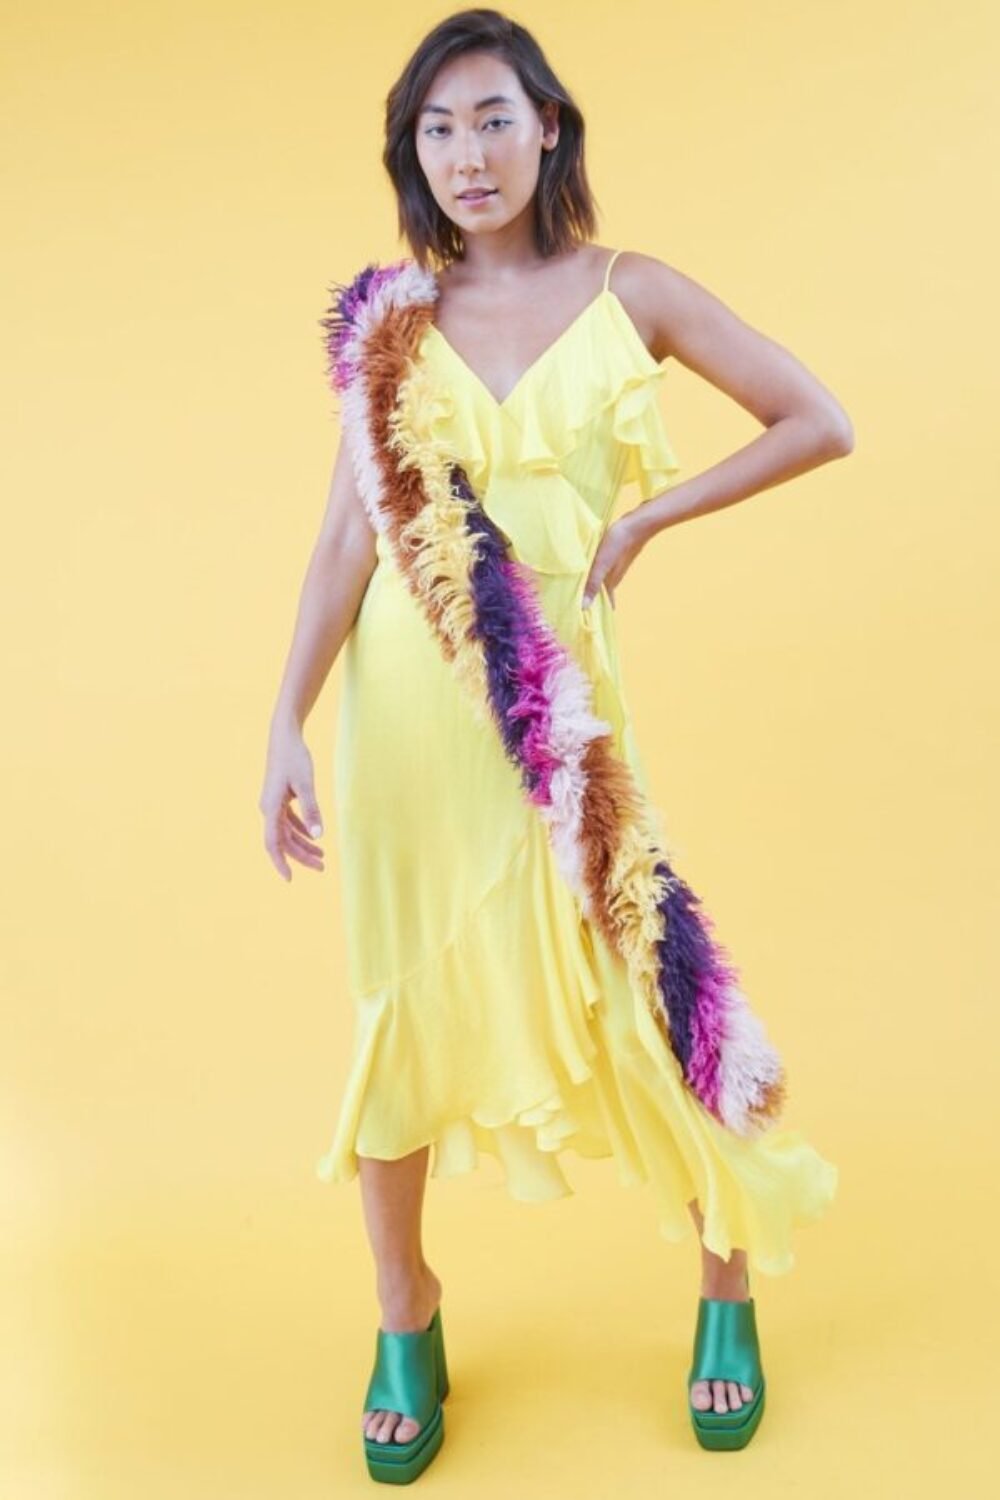 Shop Lux Yellow Silk Blend Maxi Ruffle Dress and women's luxury and designer clothes at www.lux-apparel.co.uk